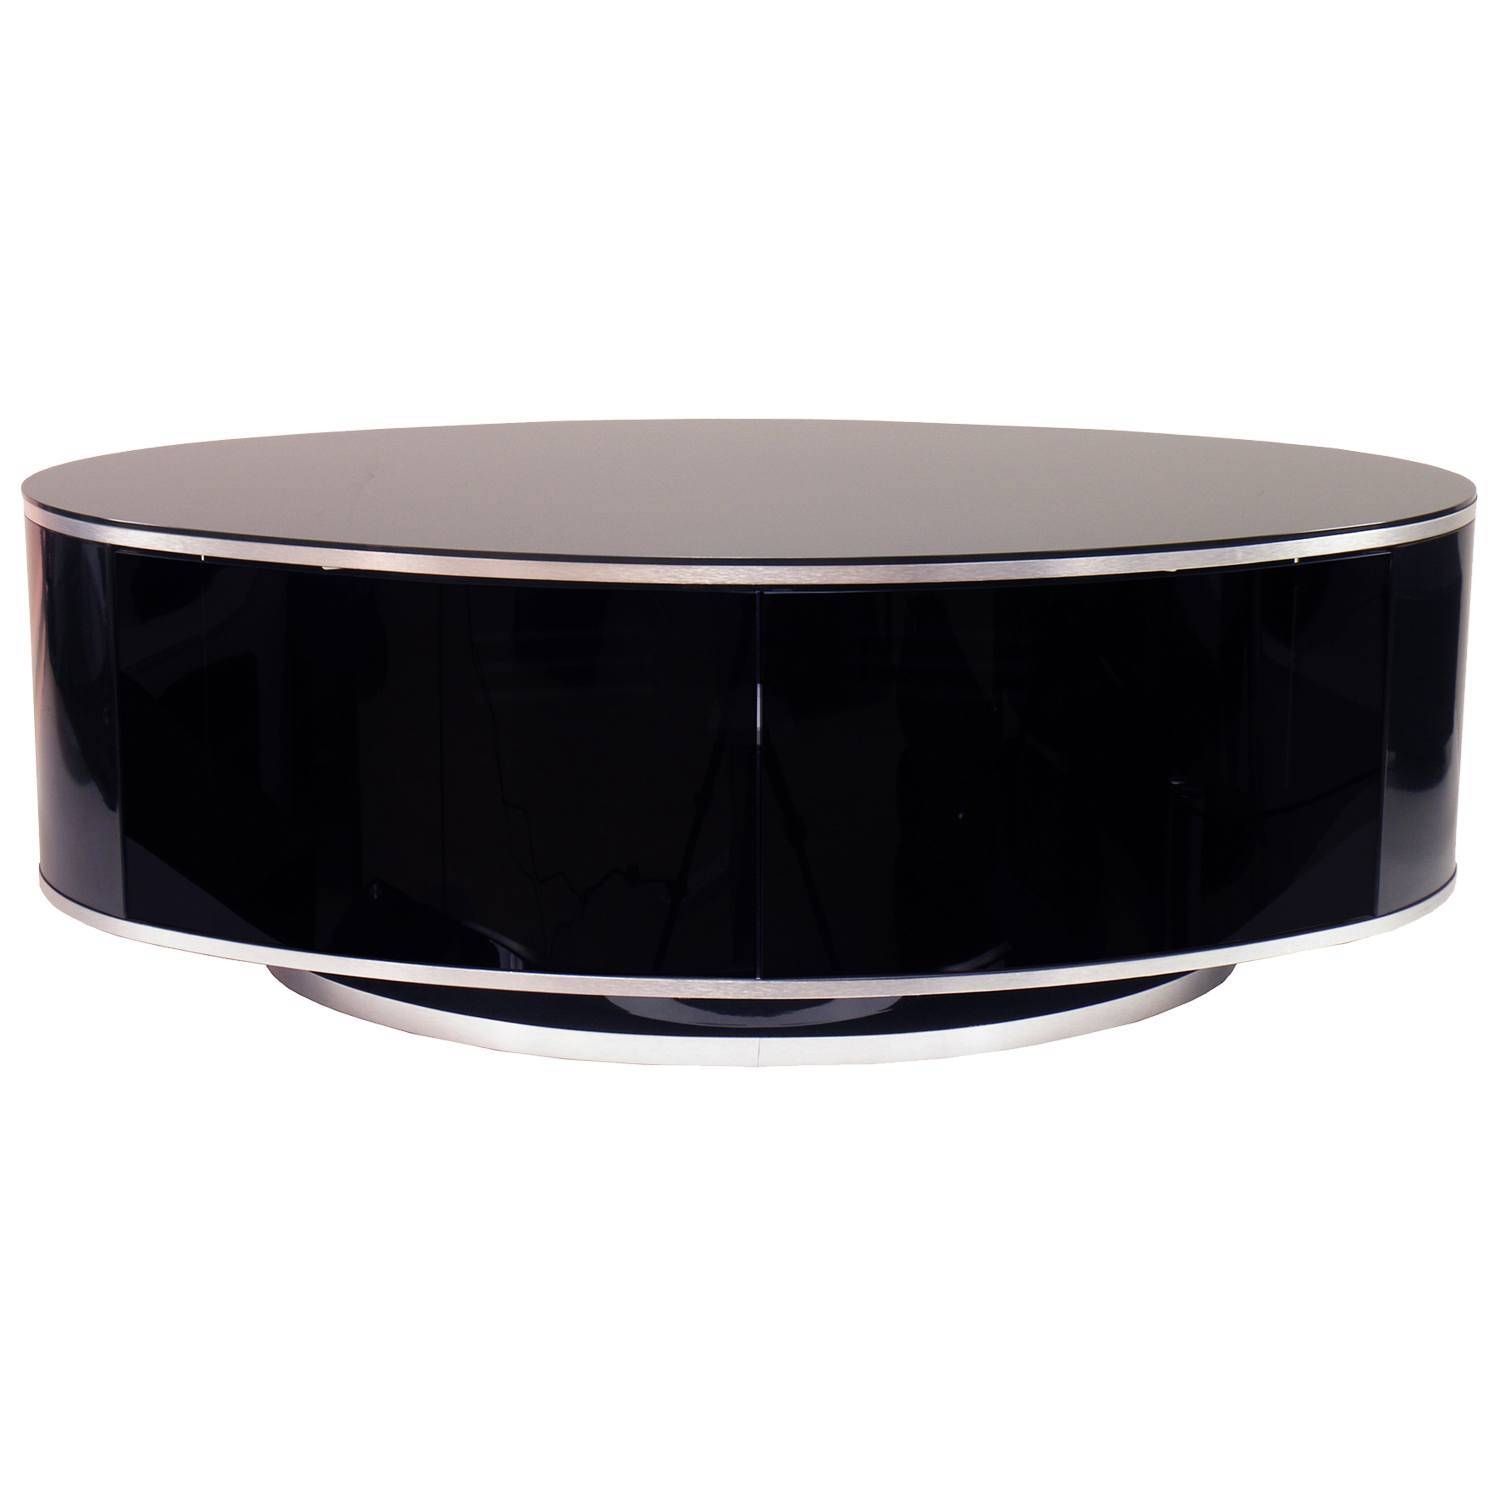 Mda Designs Luna Av High Gloss Black Oval Tv Cabinet Up To 55" Tvs Throughout White Gloss Oval Tv Stands (View 14 of 15)